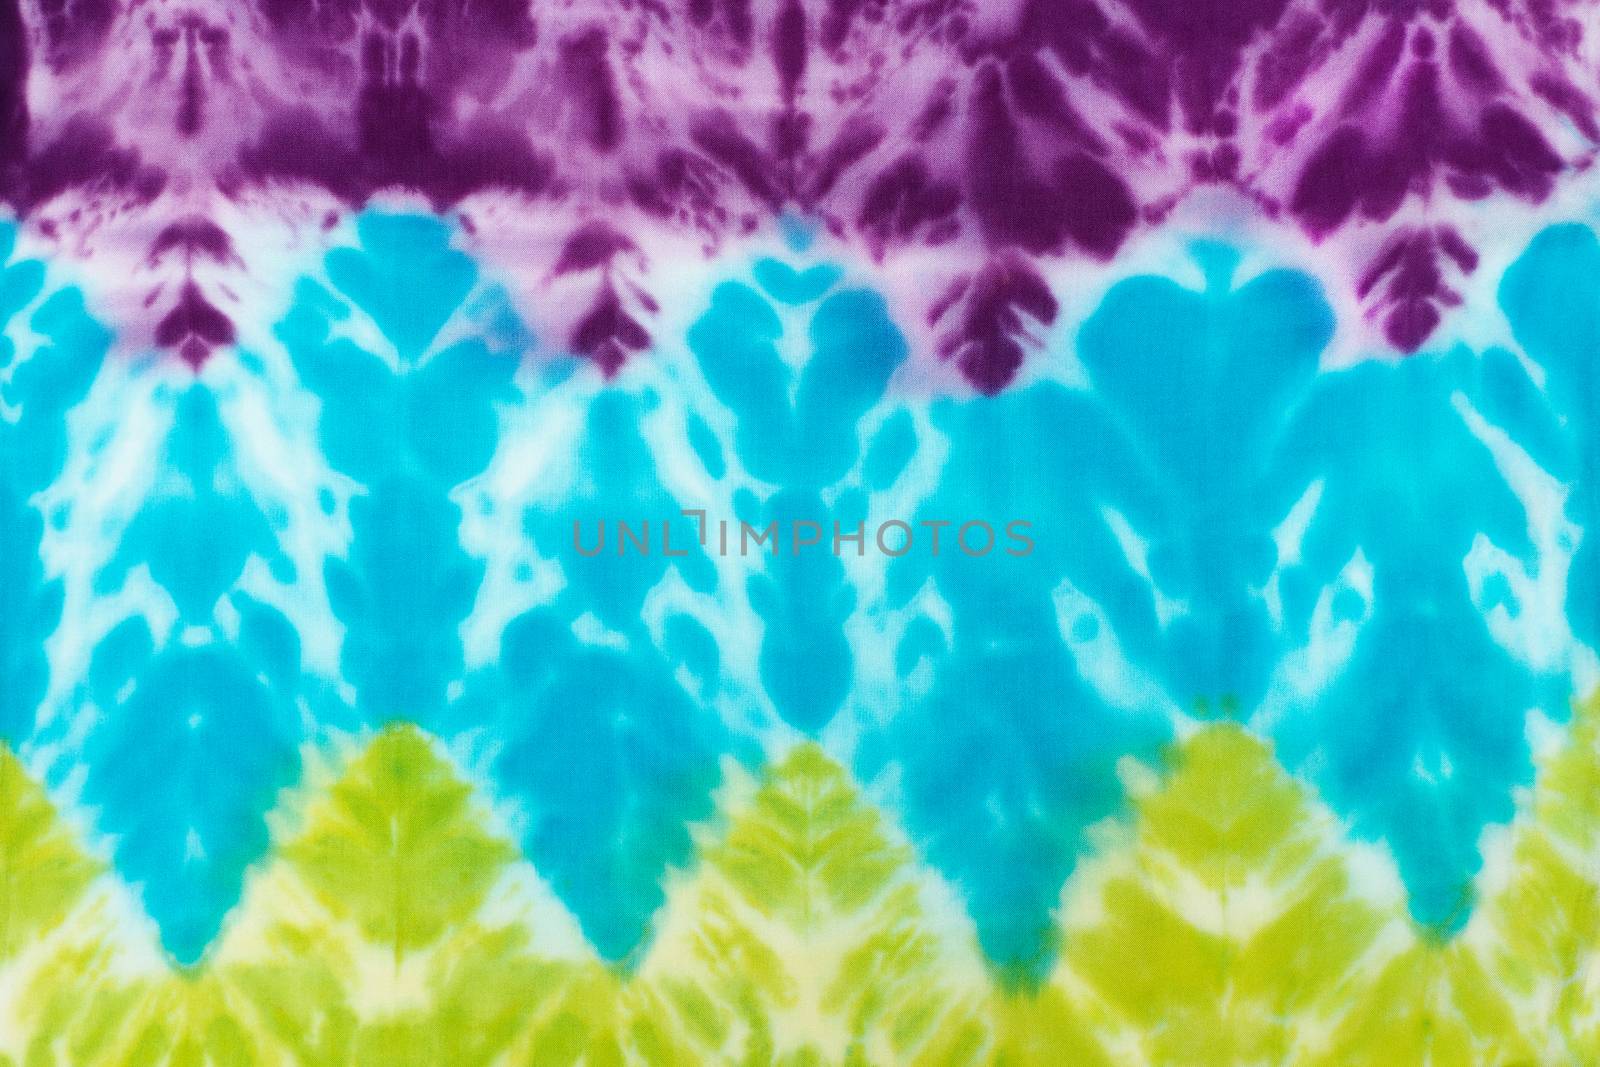 Blur fabric Tie dye bright colors texture background.